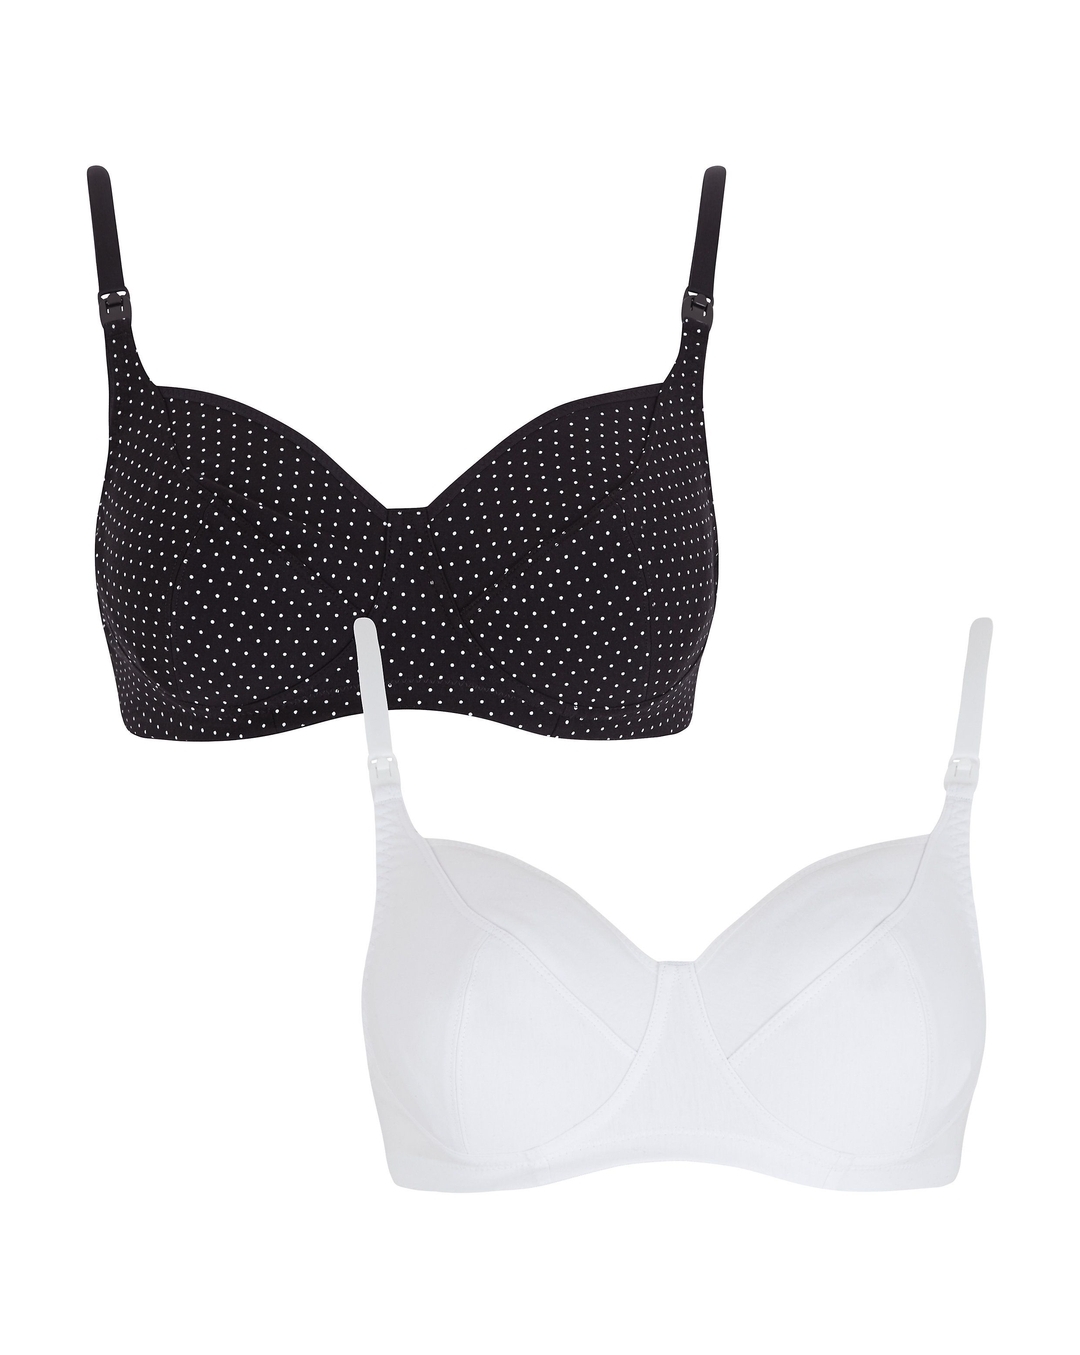 Buy Mini Spot And White Soft Cup Nursing Bras - 2 Pack Online at